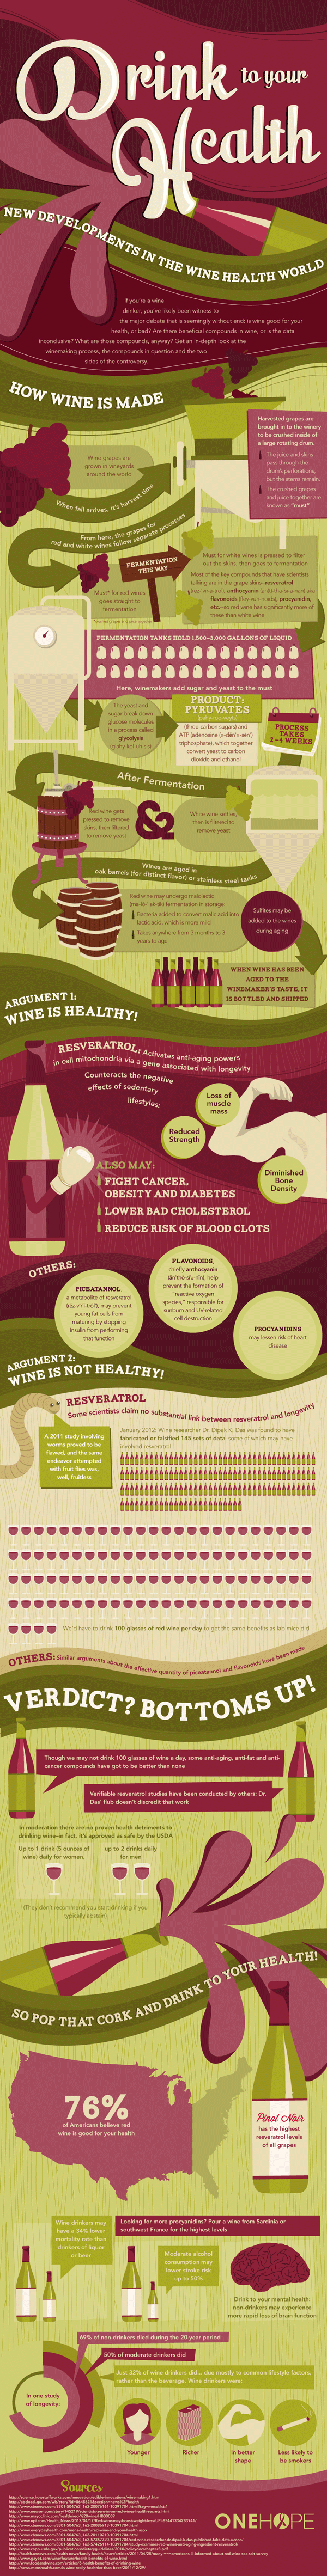 Drink to Your Health infographic from ONEHOPE Wine